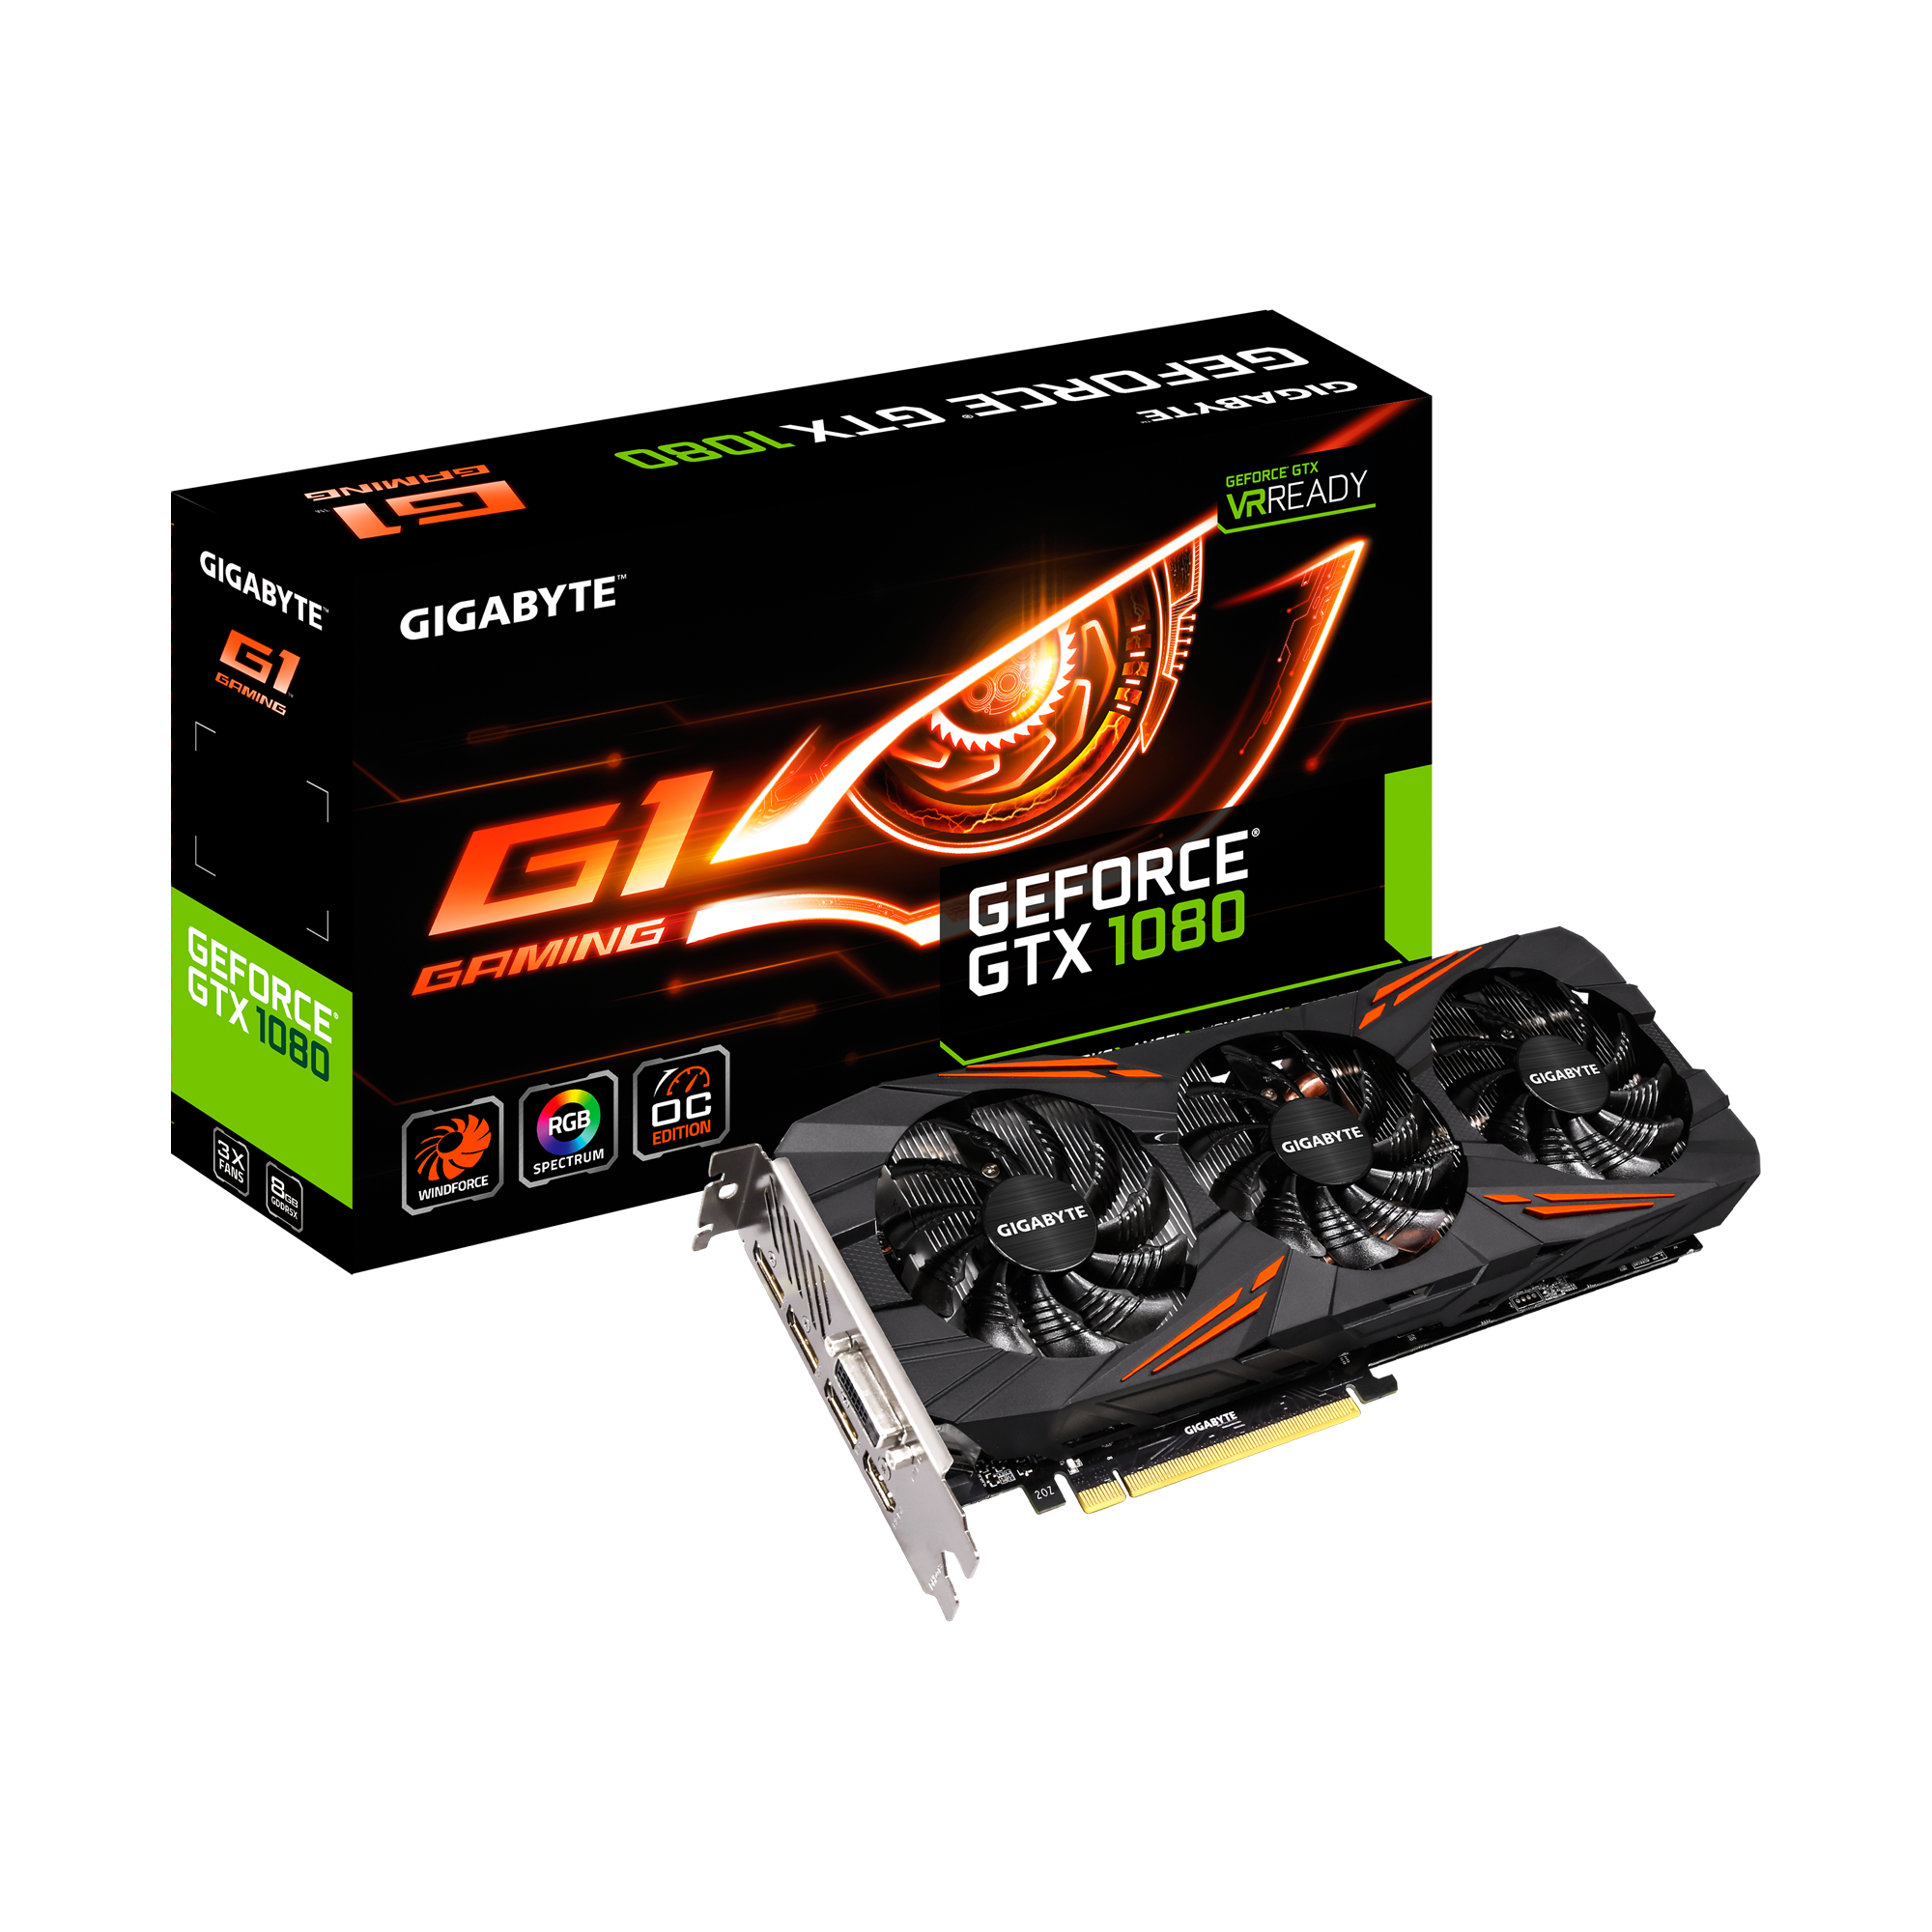 GeForce® GTX 1080 G1 Gaming 8G Key Features | Graphics Card 